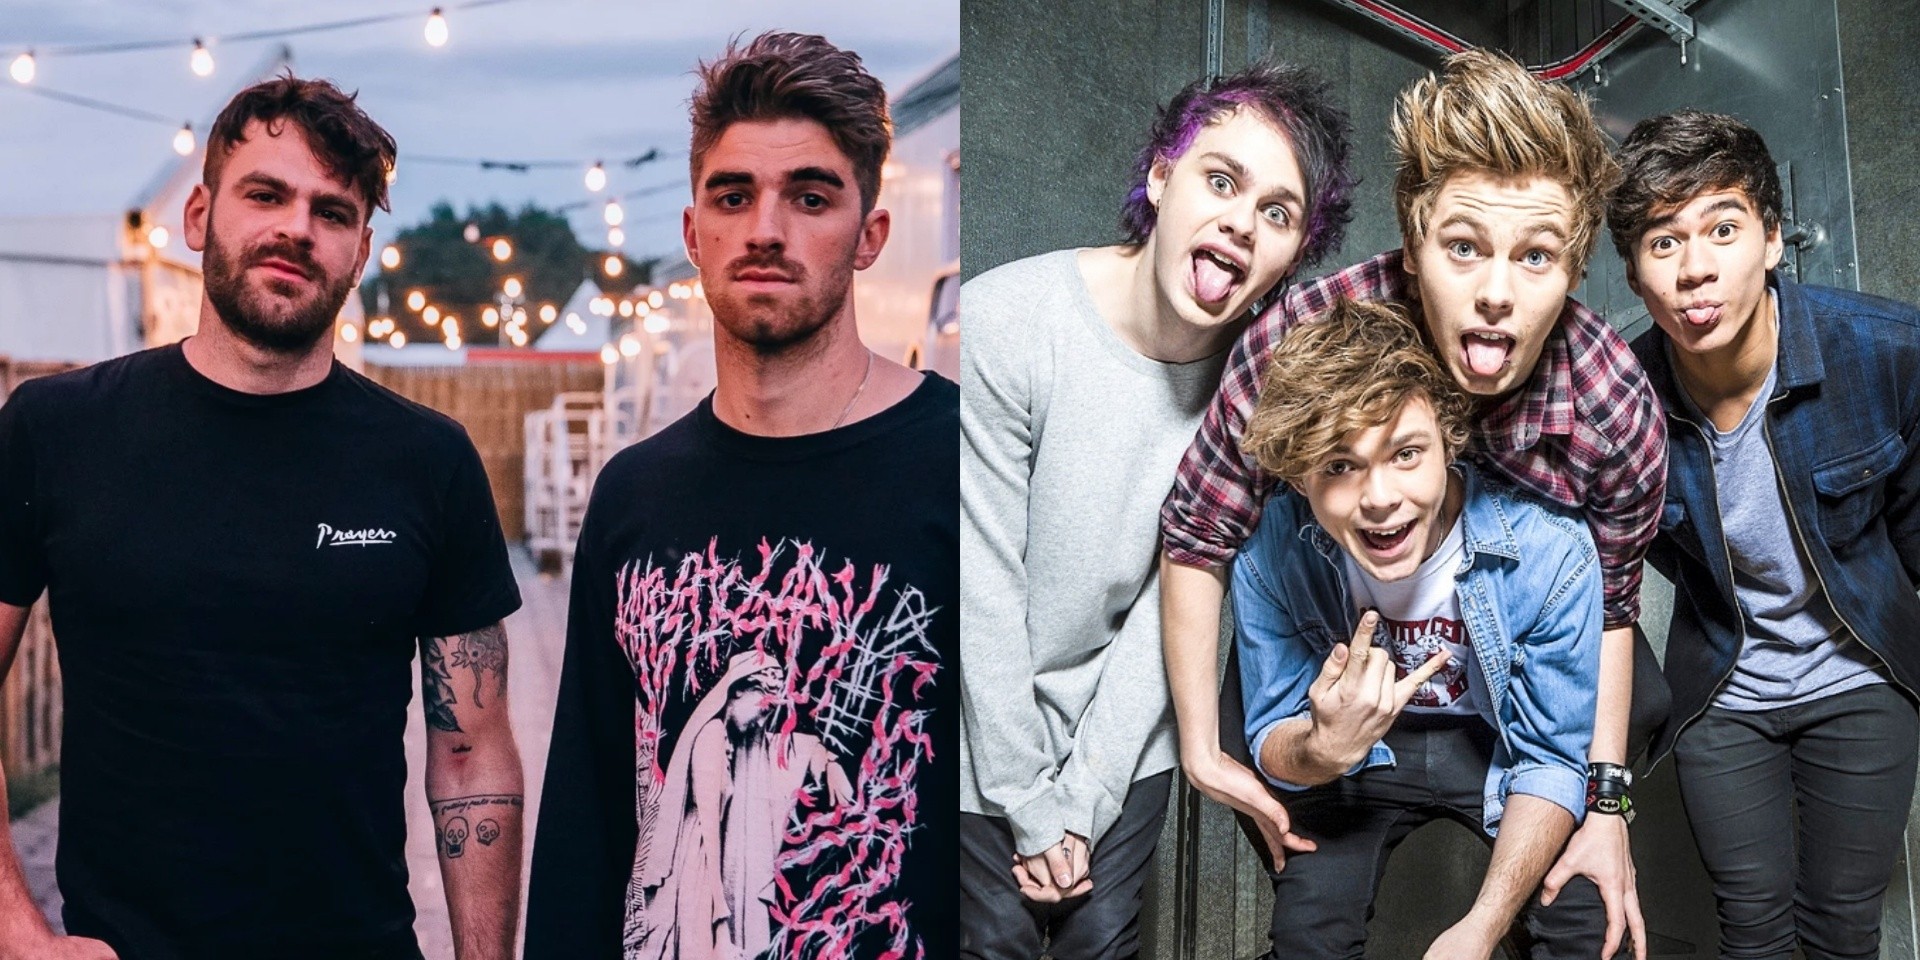 The Chainsmokers and 5 Seconds Of Summer battle each other for blazing glory in new music video for 'Who Do You Love' – watch